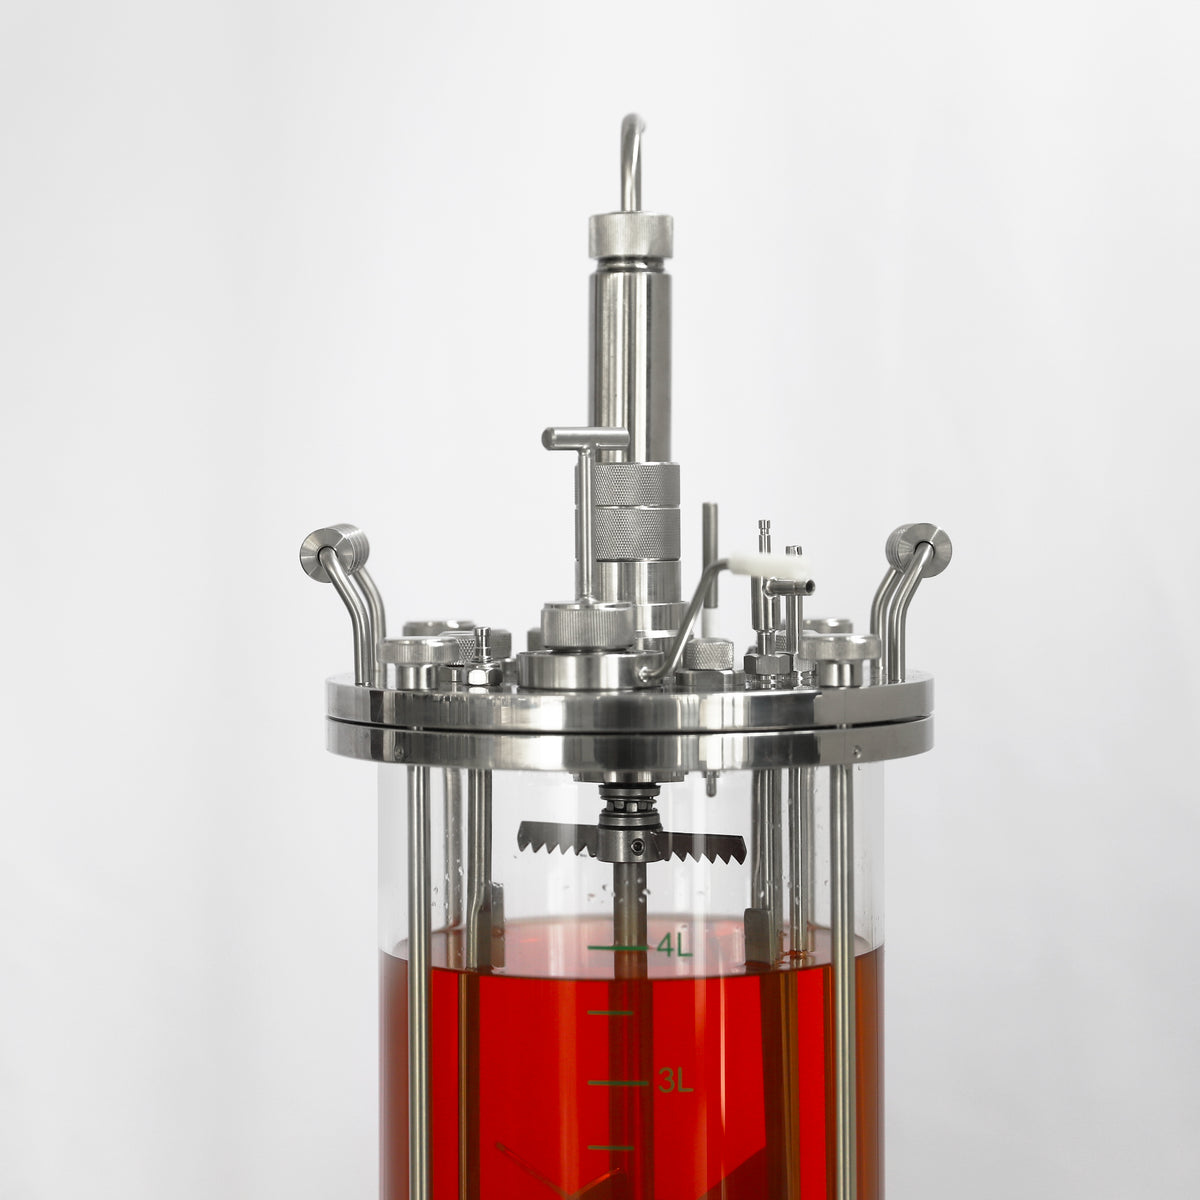 7L Benchtop Bioreactor for Microbial Fermentation with 2 Gas Inlets BR100-C1